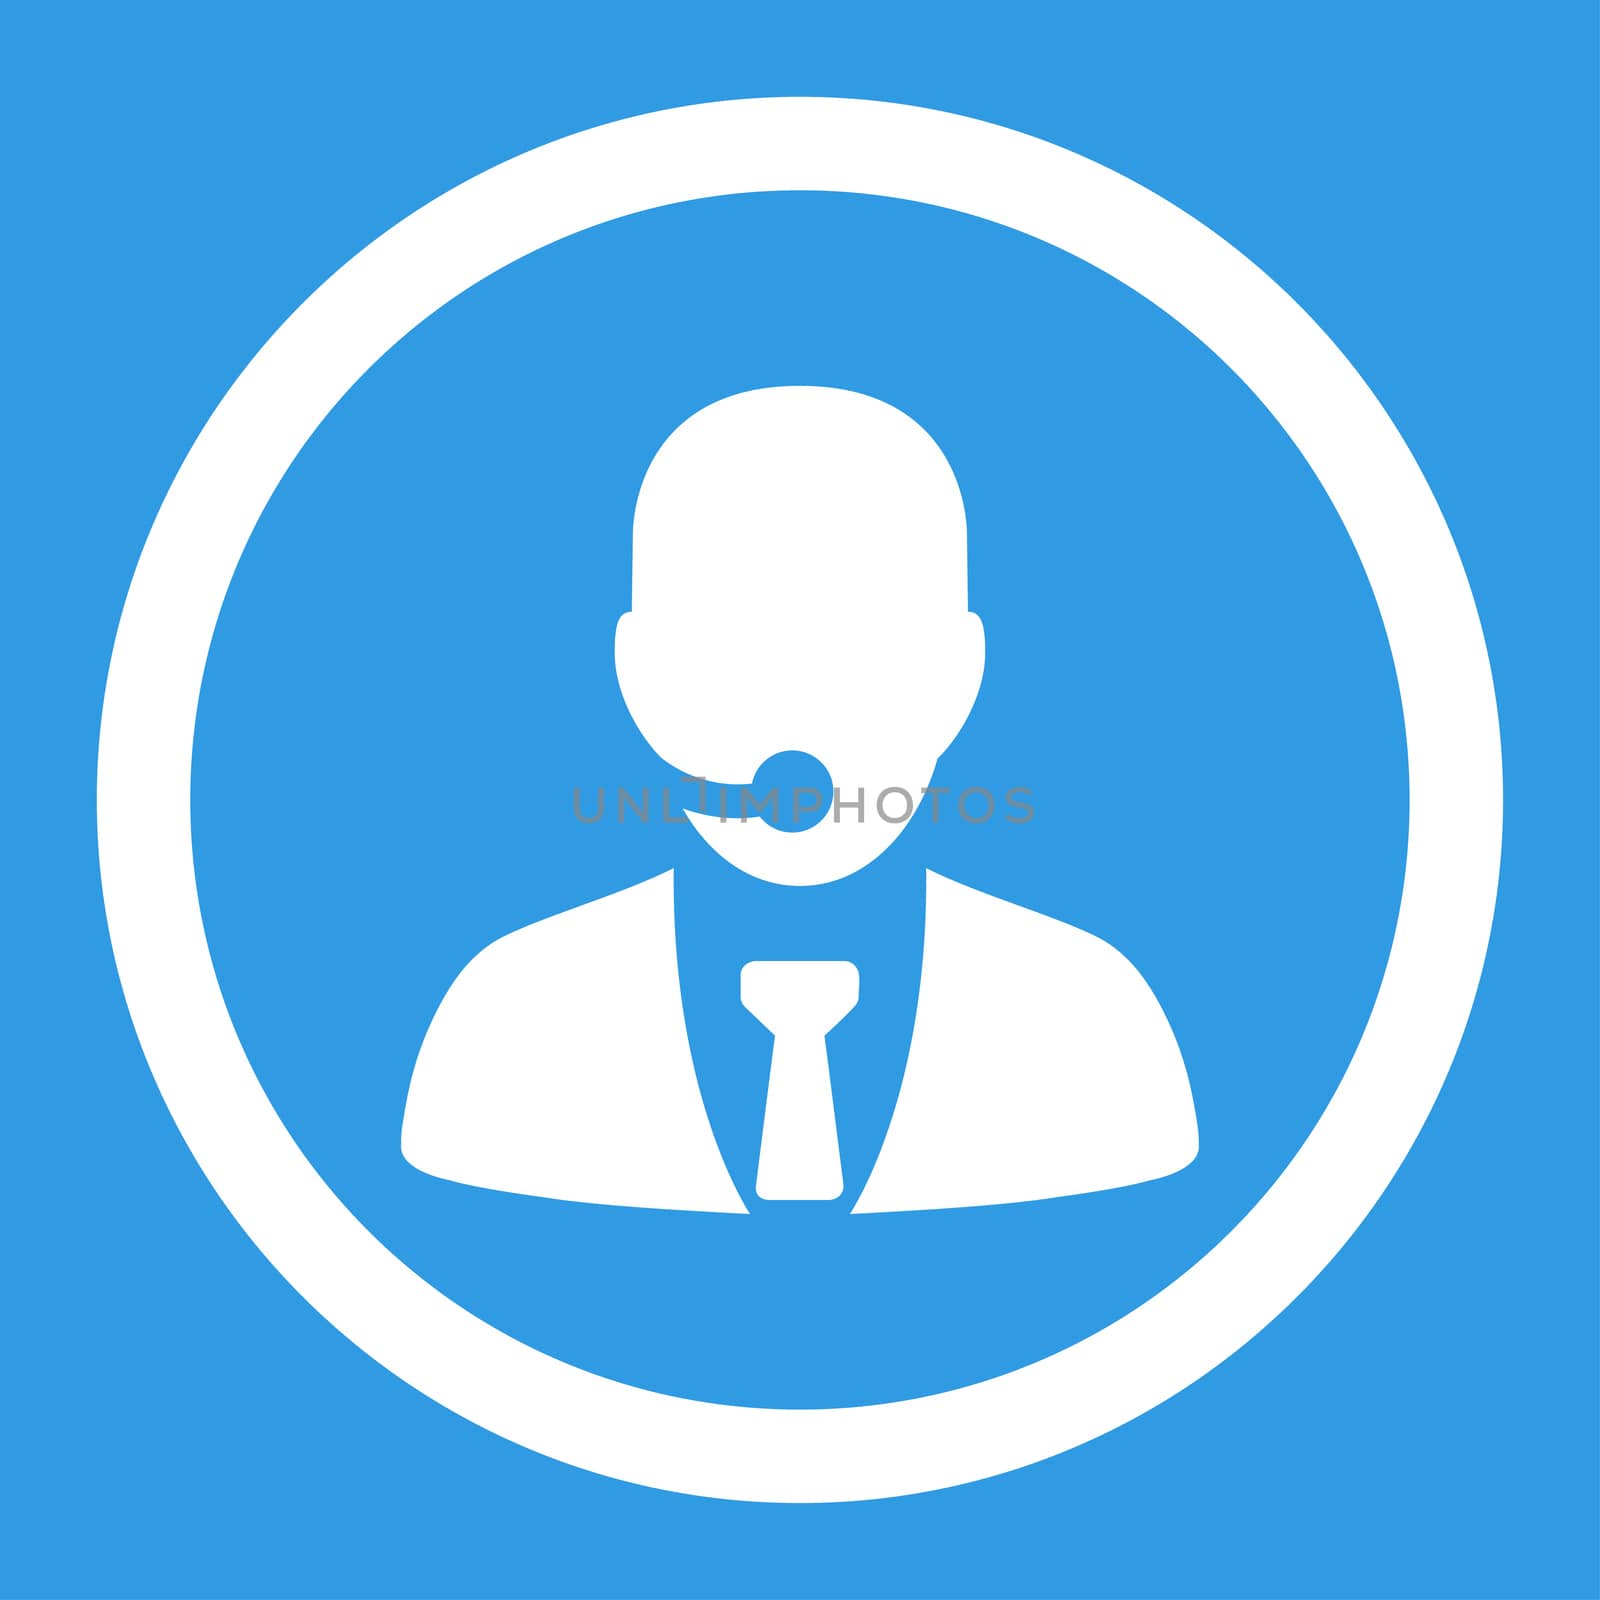 Call center operator glyph icon. This rounded flat symbol is drawn with white color on a blue background.